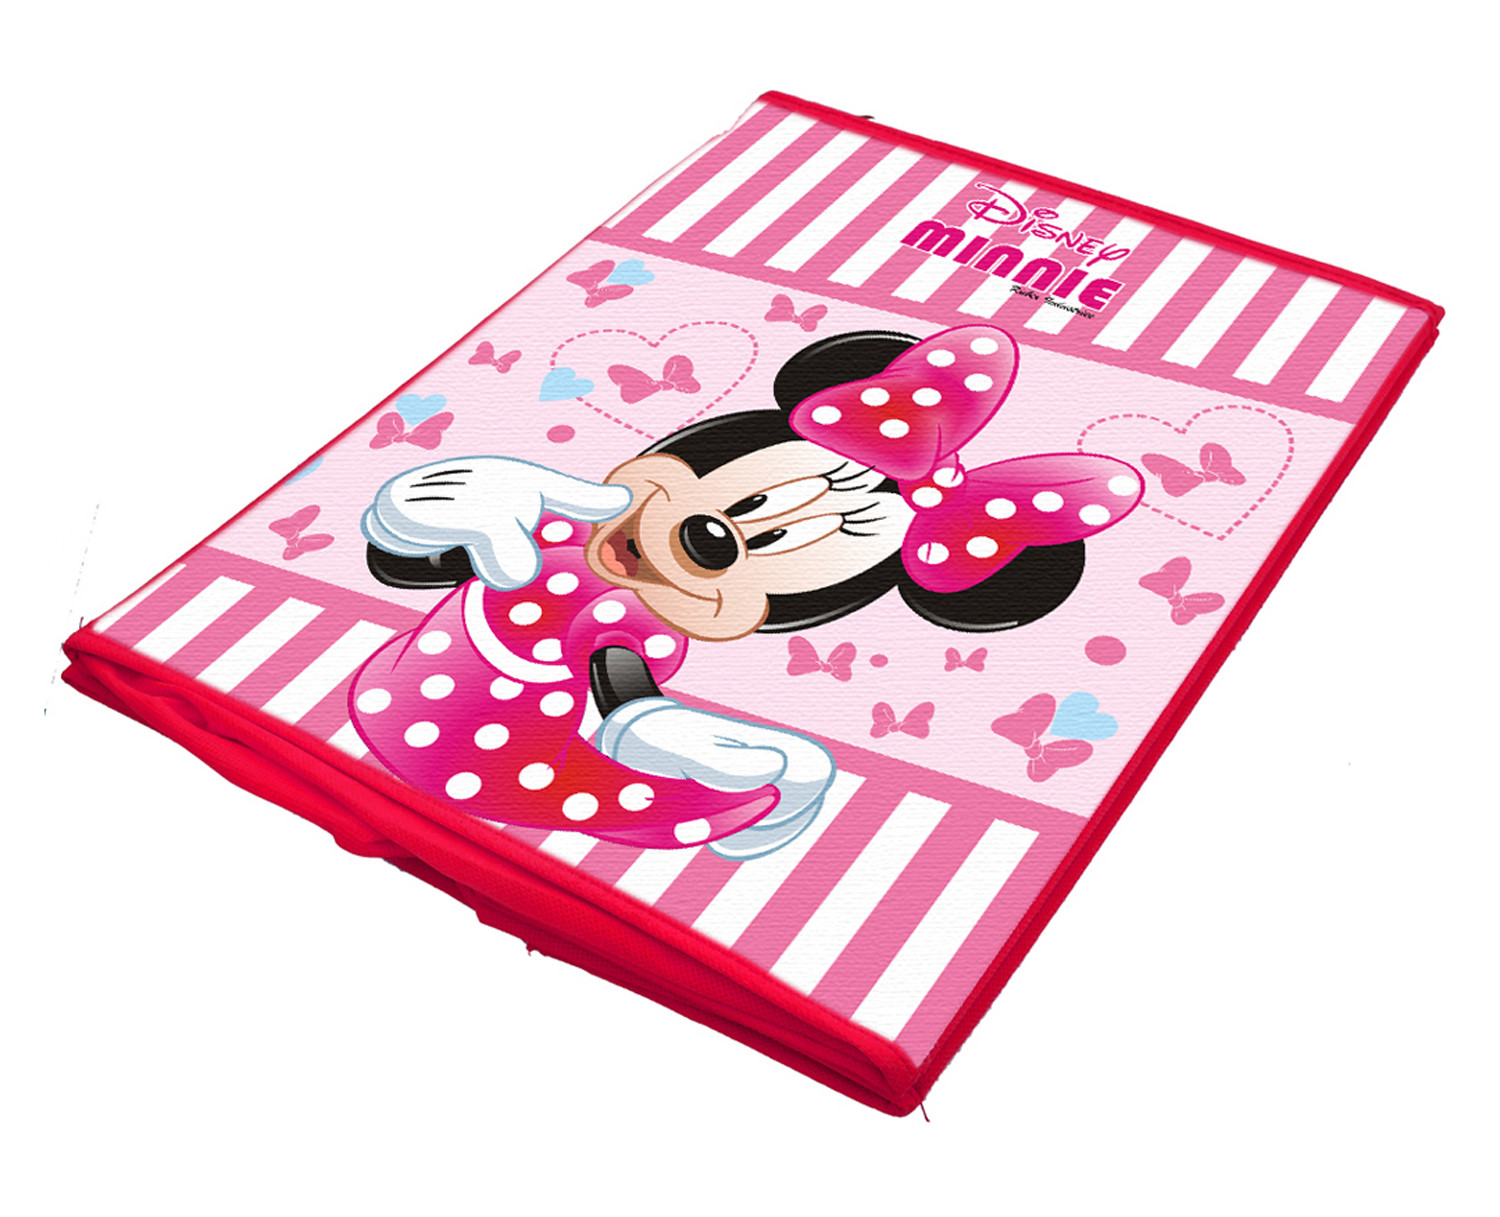 Kuber Industries Disney Minnie Print Non Woven Fabric Foldable Laundry Organiser With Lid & Handles (Pink)